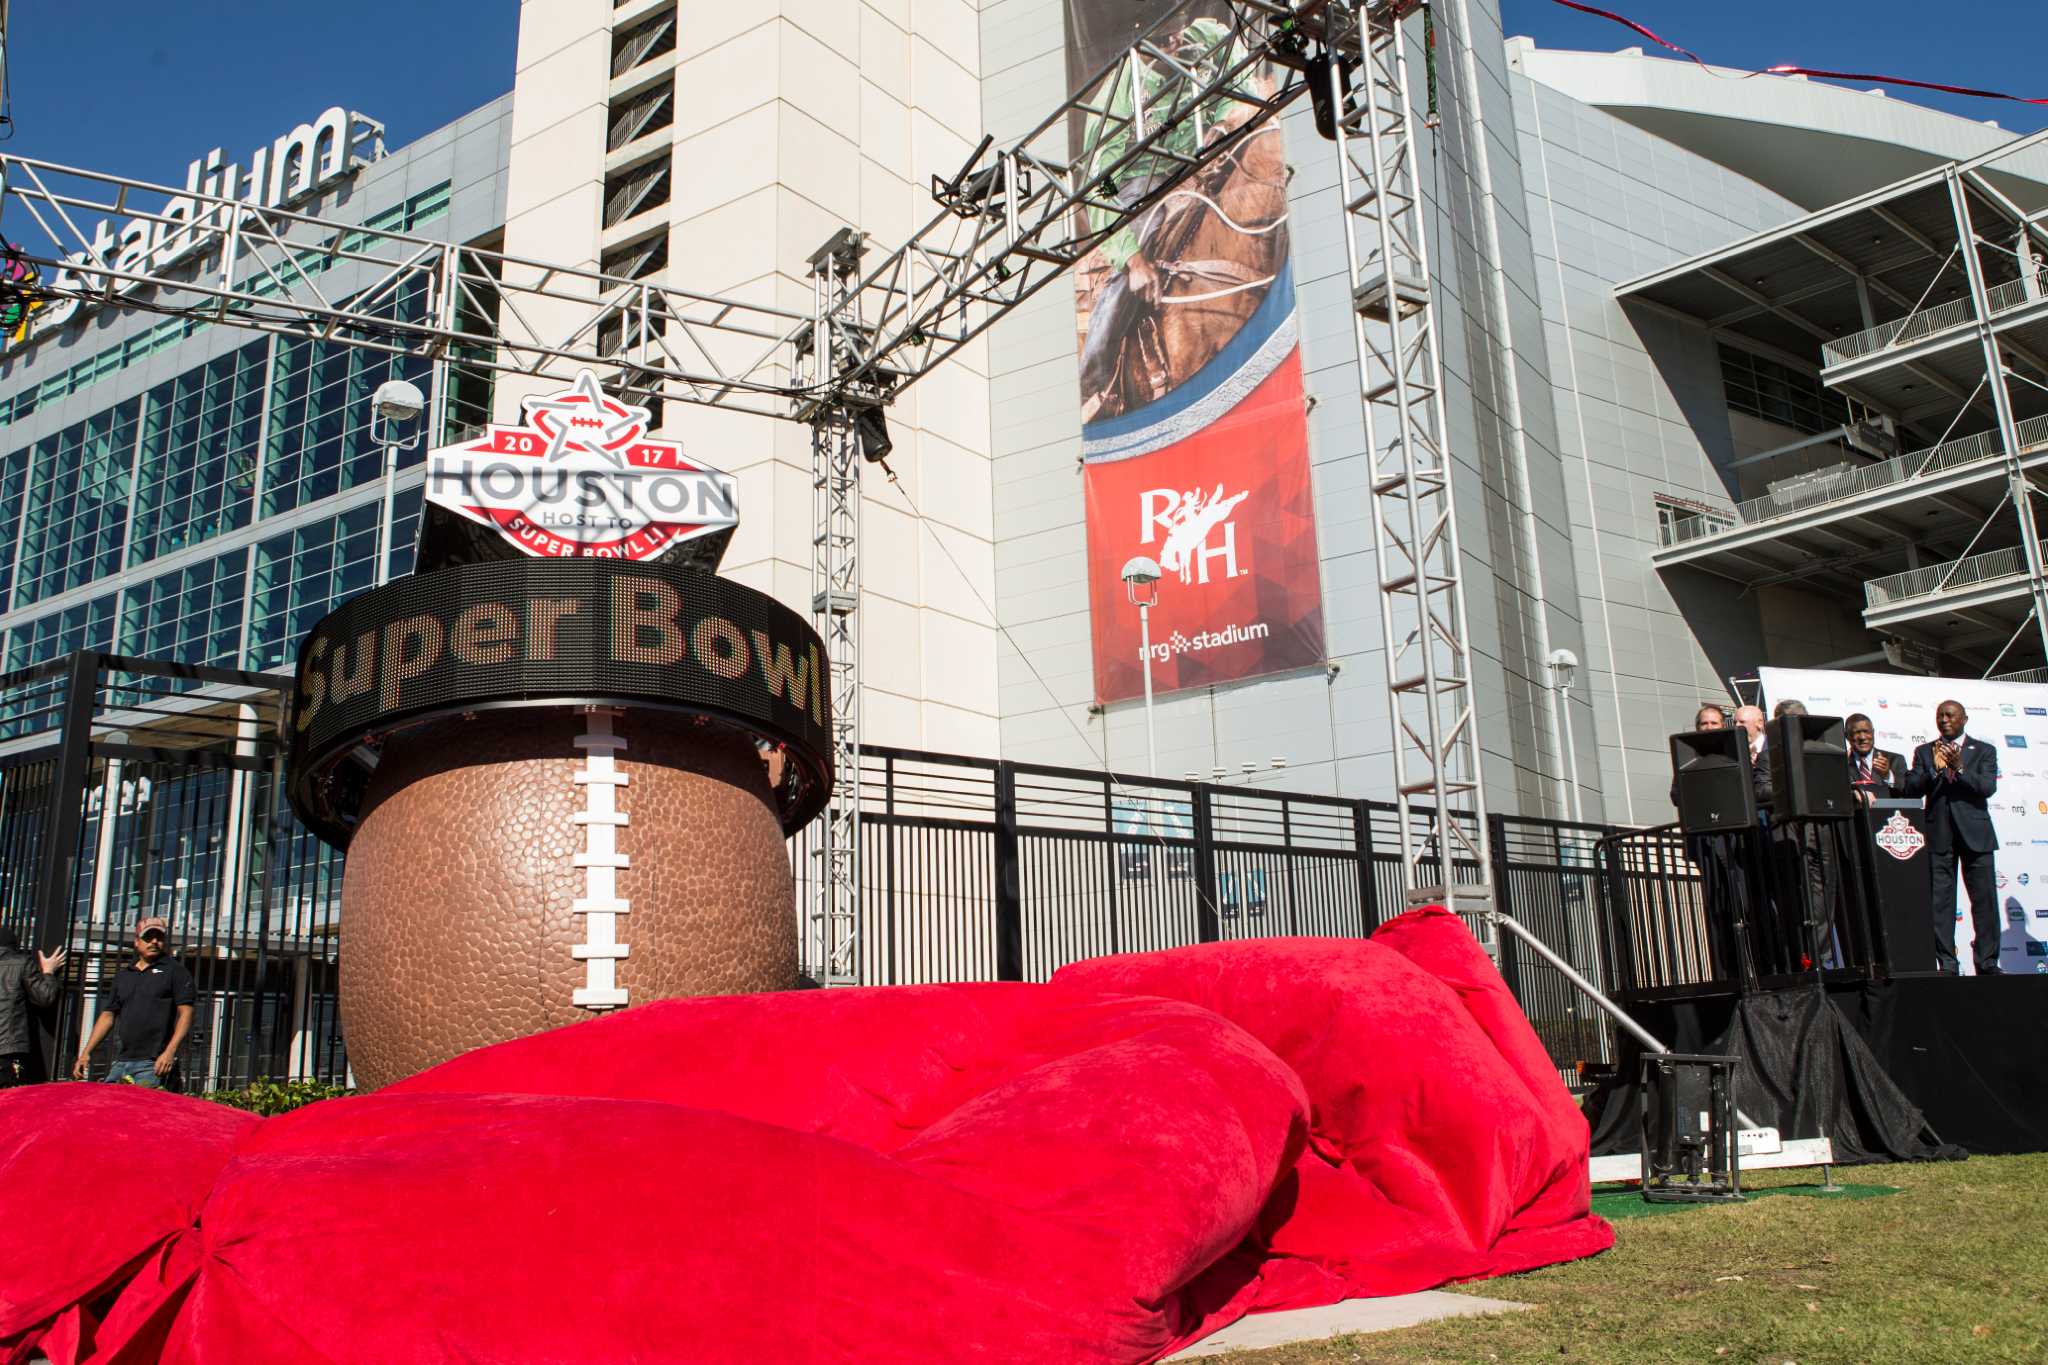 Tickets for Super Bowl's NFL Experience go on sale Wednesday - Houston Chronicle2048 x 1365